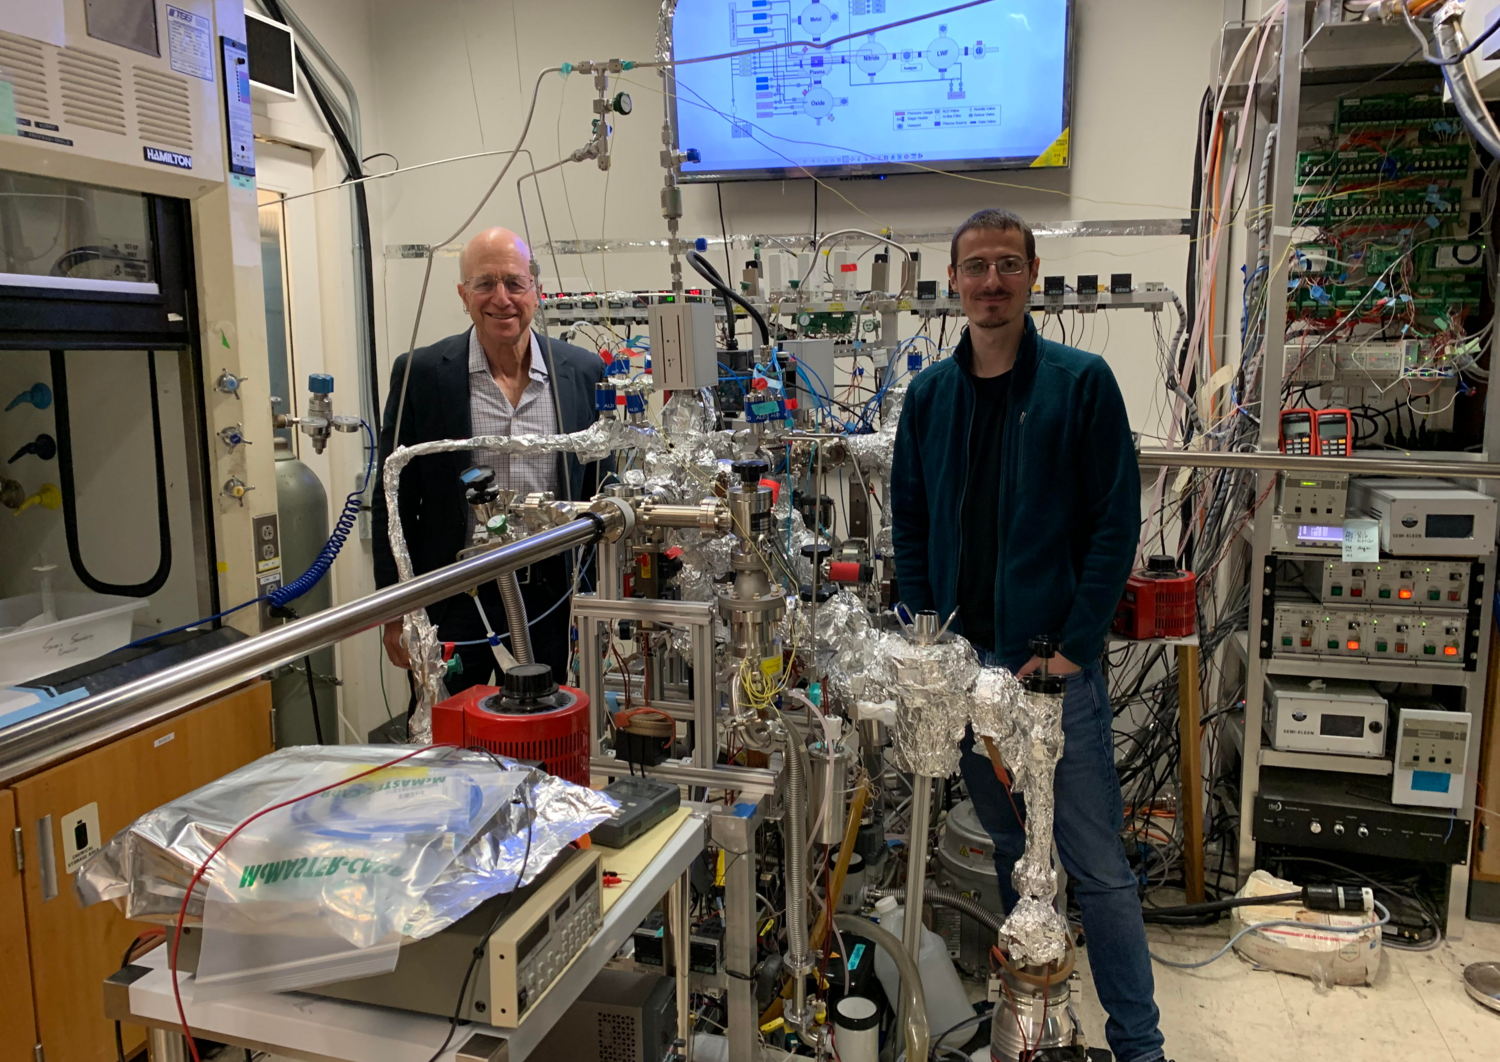 Jannick and Prof. Kummel in the UCSD Lab